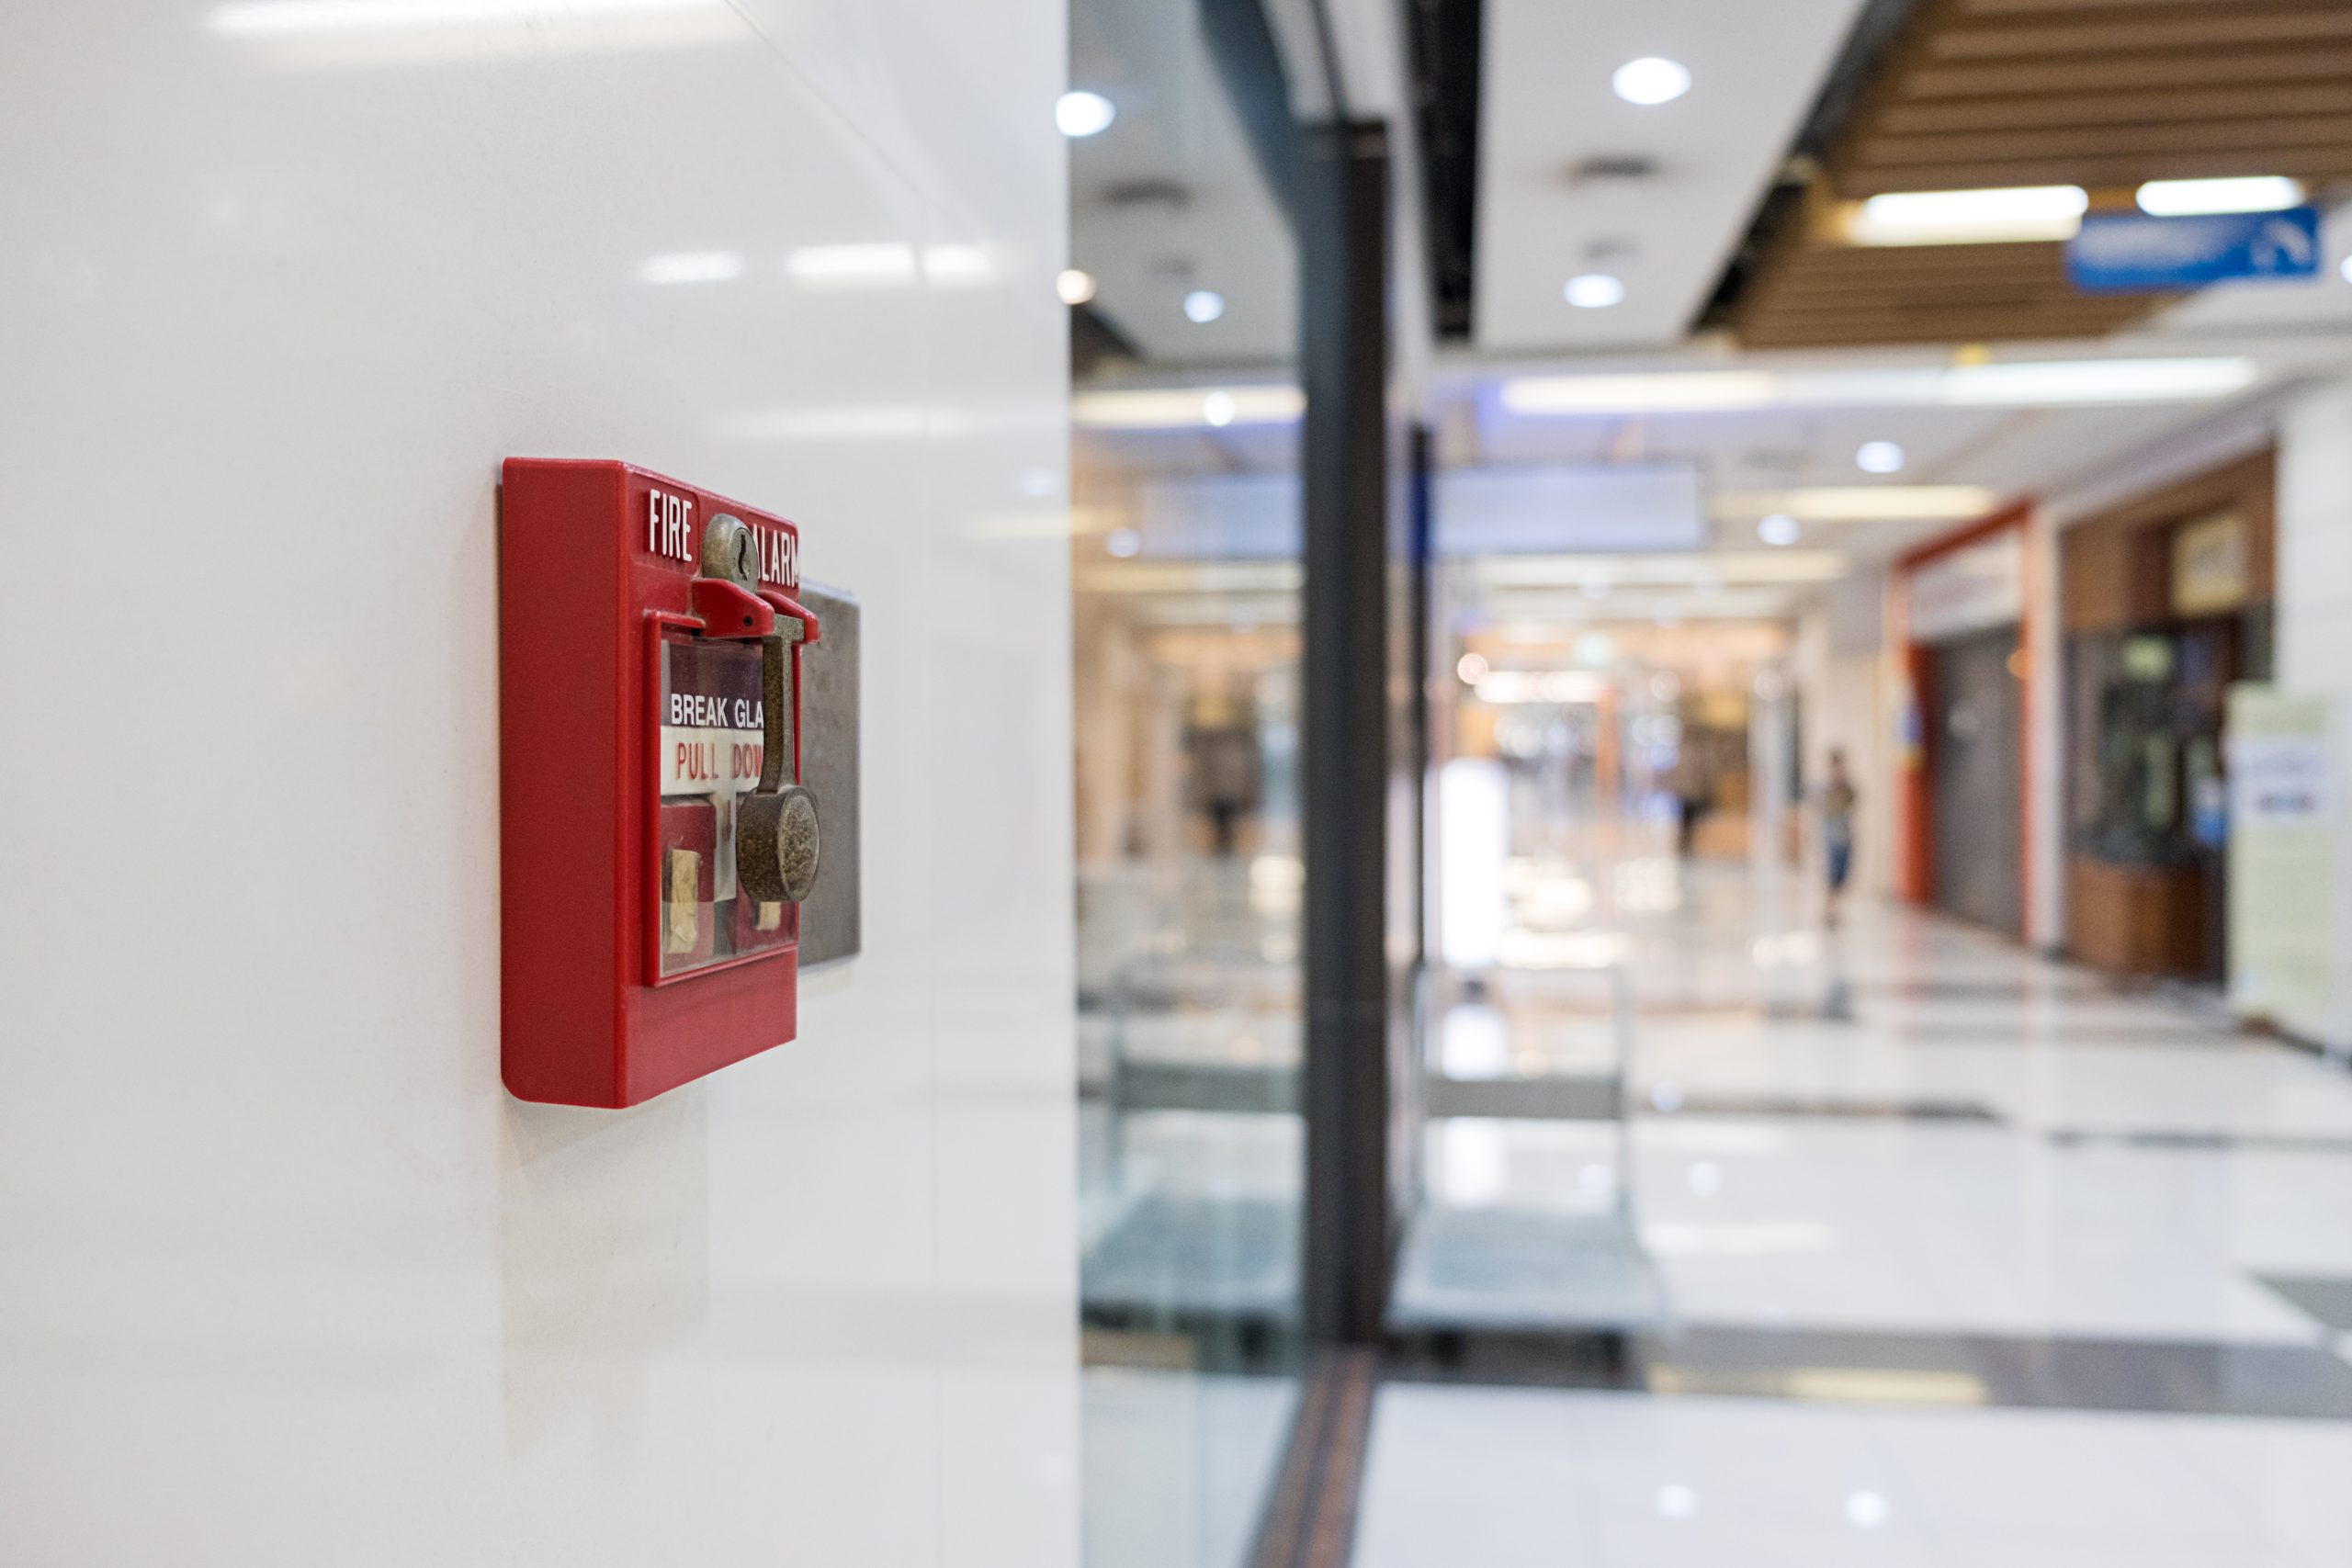 cover - image - Can you provide fire protection services for schools and educational facilities? faq - Fire Alarm Services